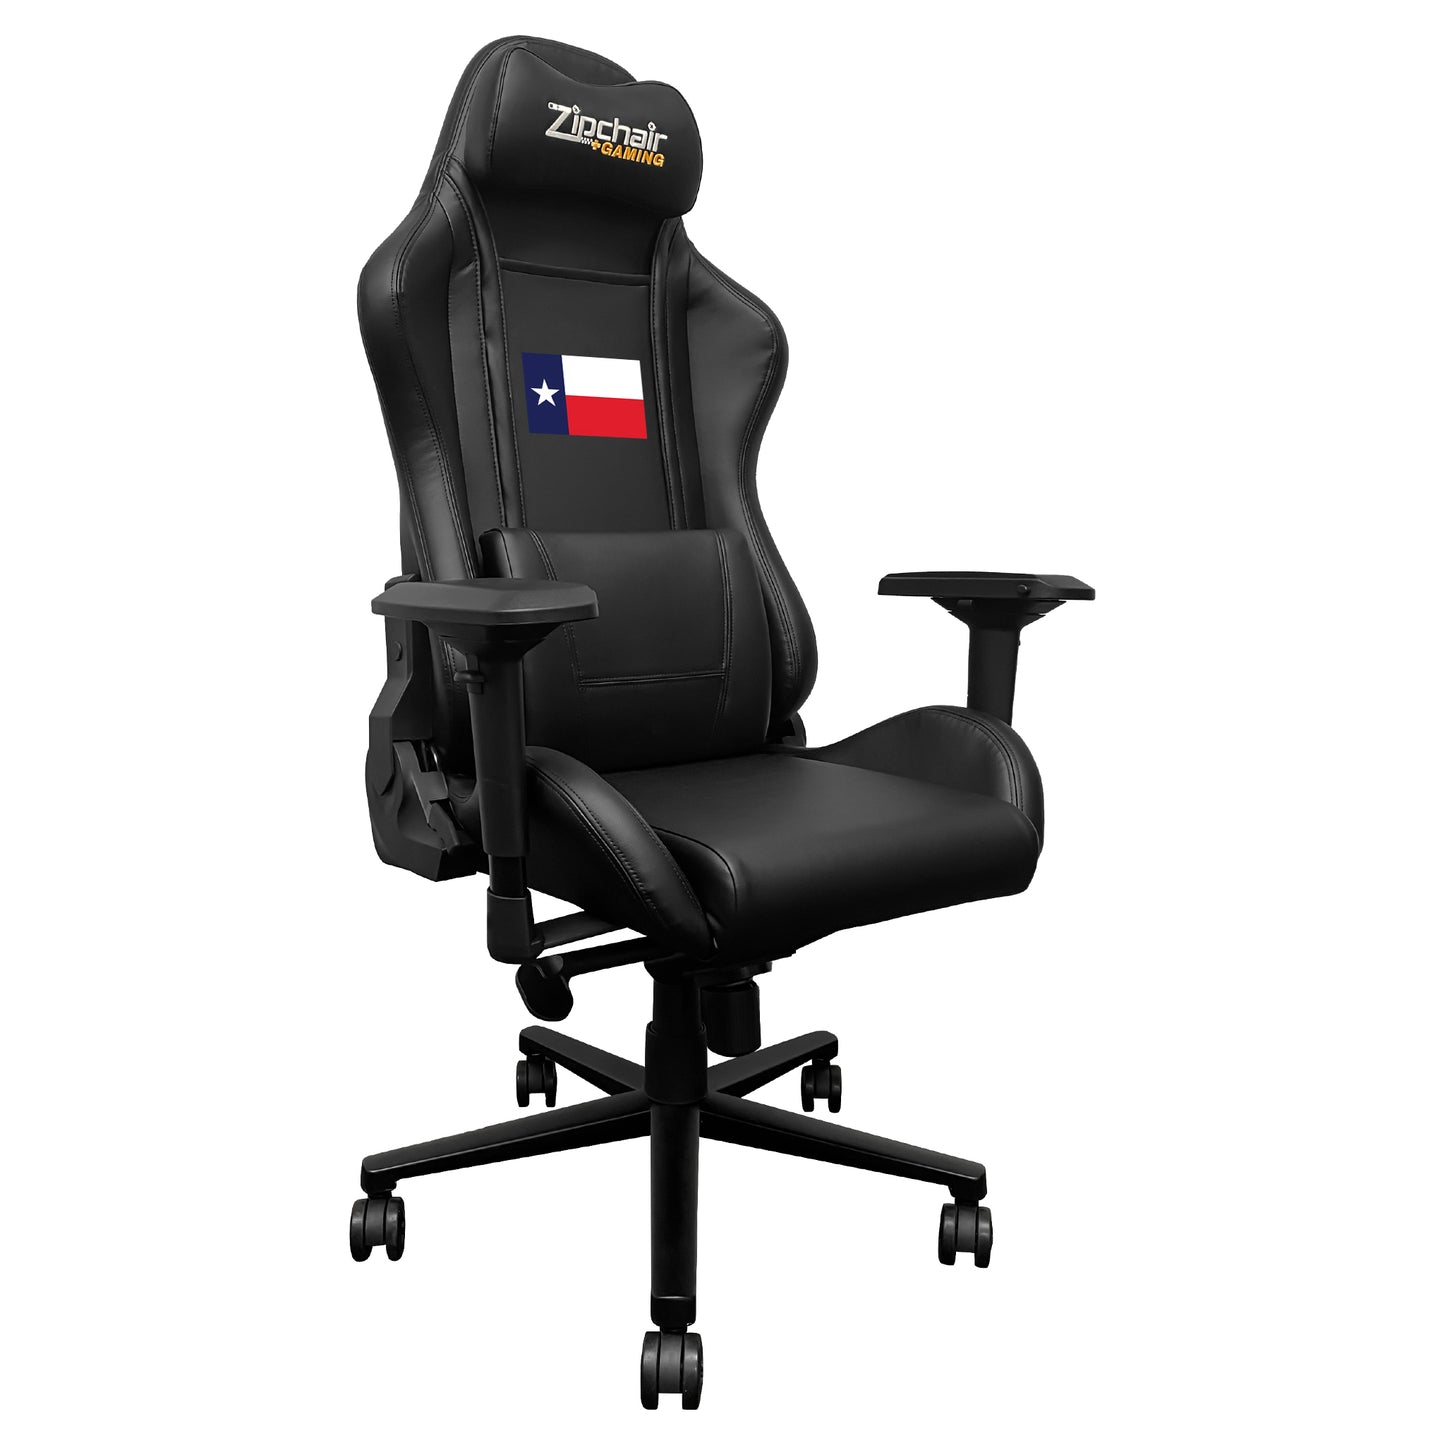 Xpression Pro Gaming Chair with Texan Flag Logo